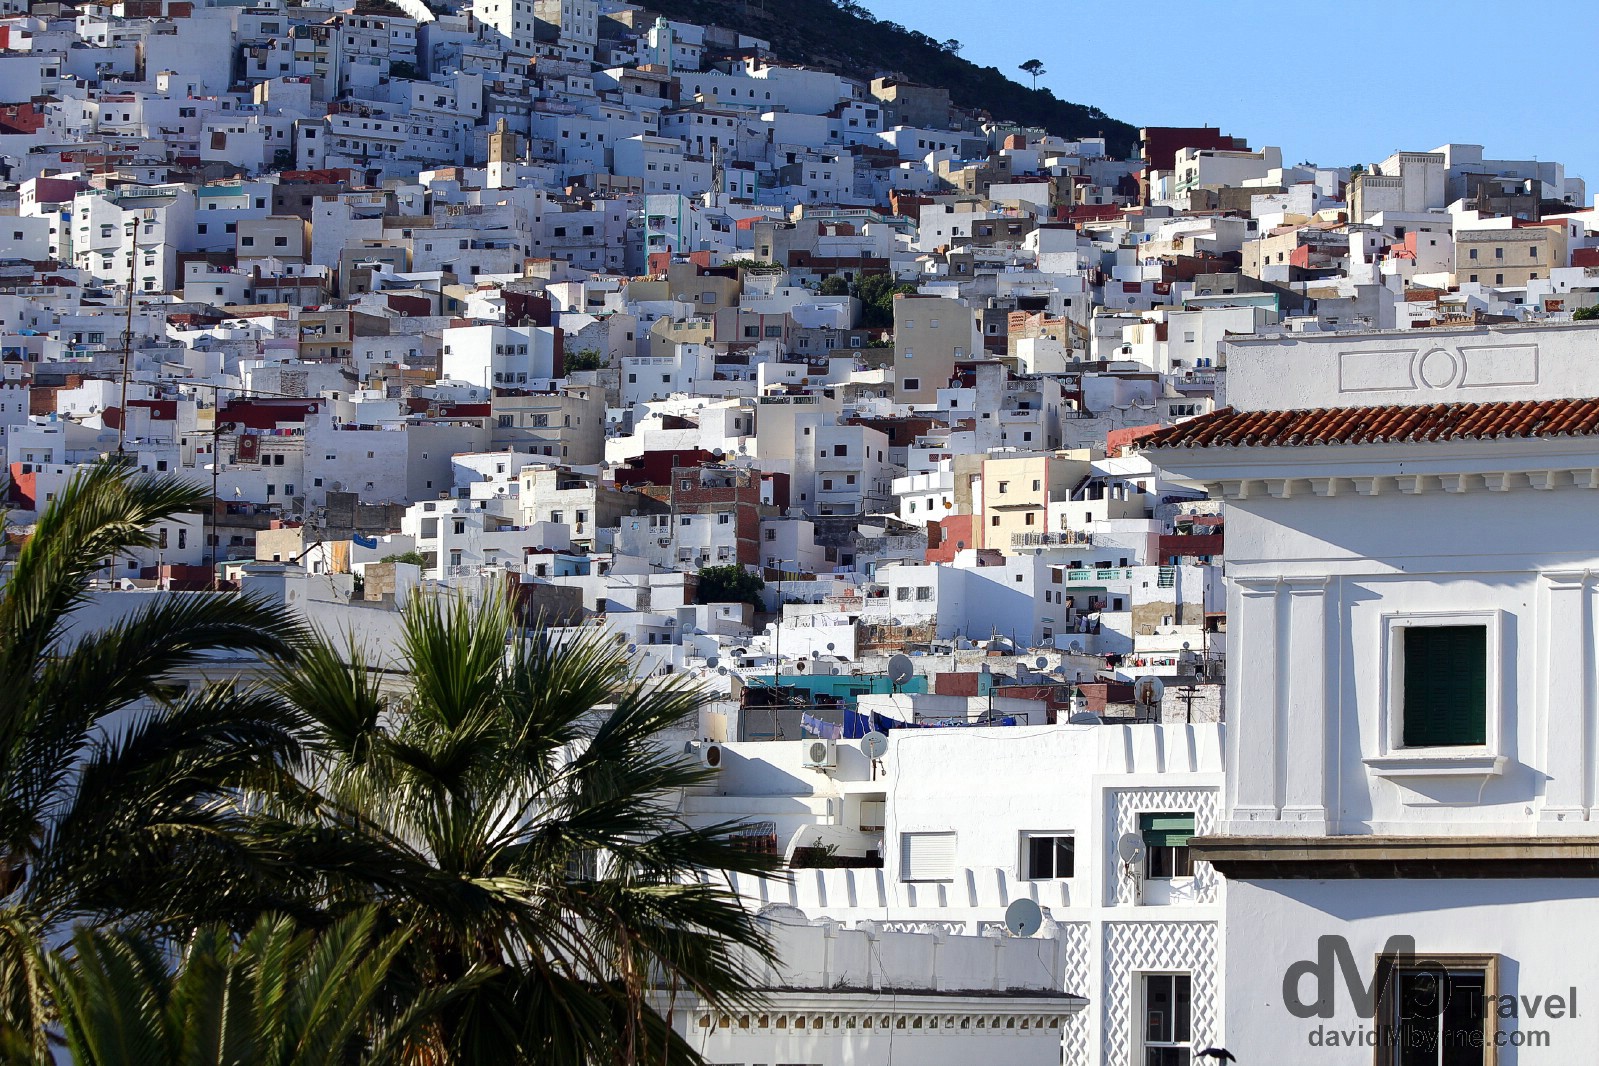 The whitewashed buildings of northern Teotuan at the foot of the northern Rif mountains as seen from Ville Nouvelle. Tetouan, Morocco. June 2nd, 2014.